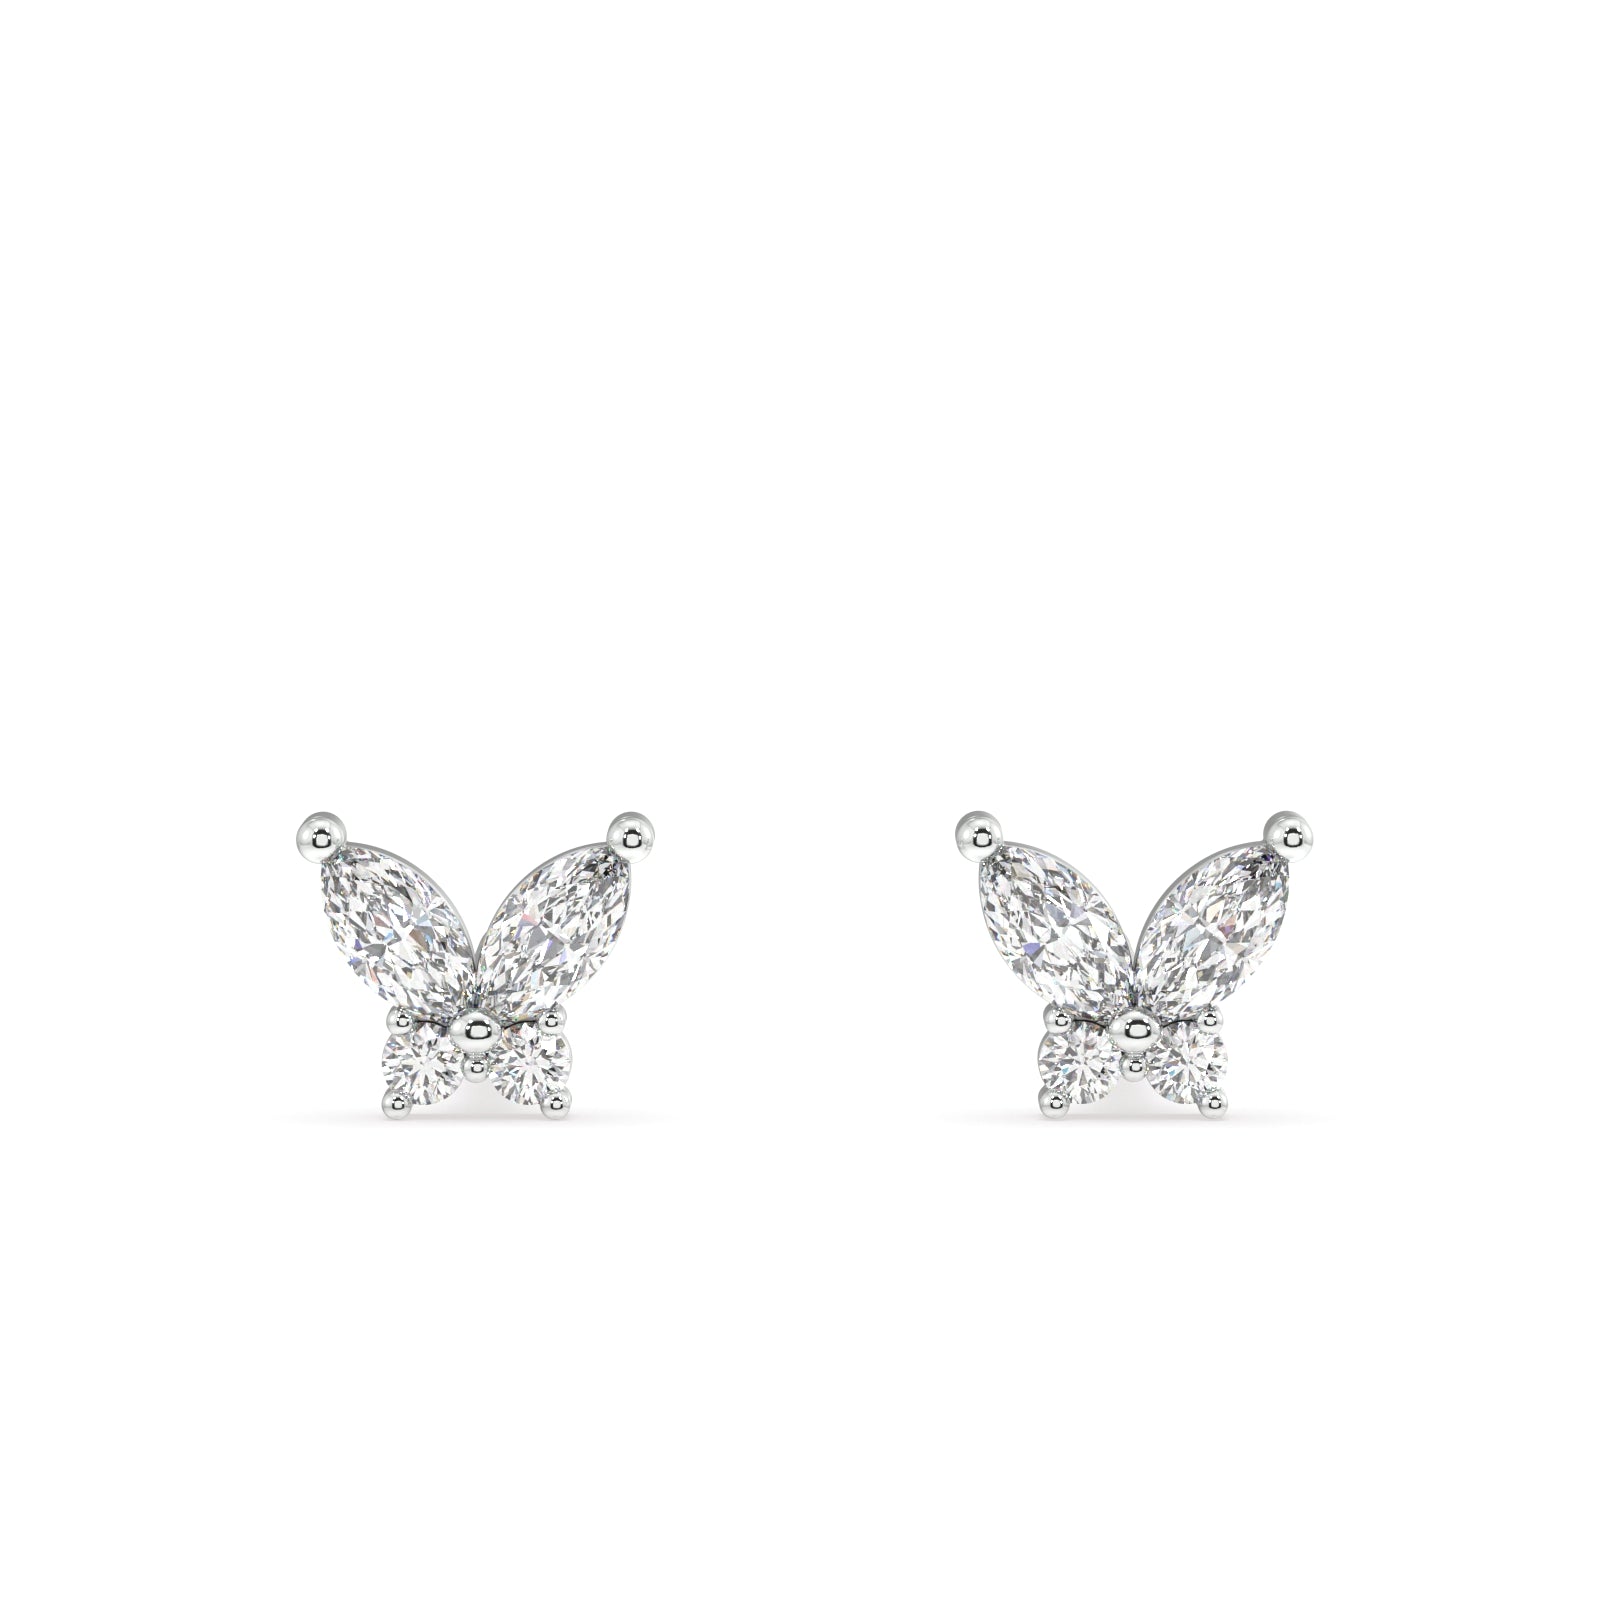 "Front View of Butterfly Stud Earrings - Rhodium-Plated Jewelry"